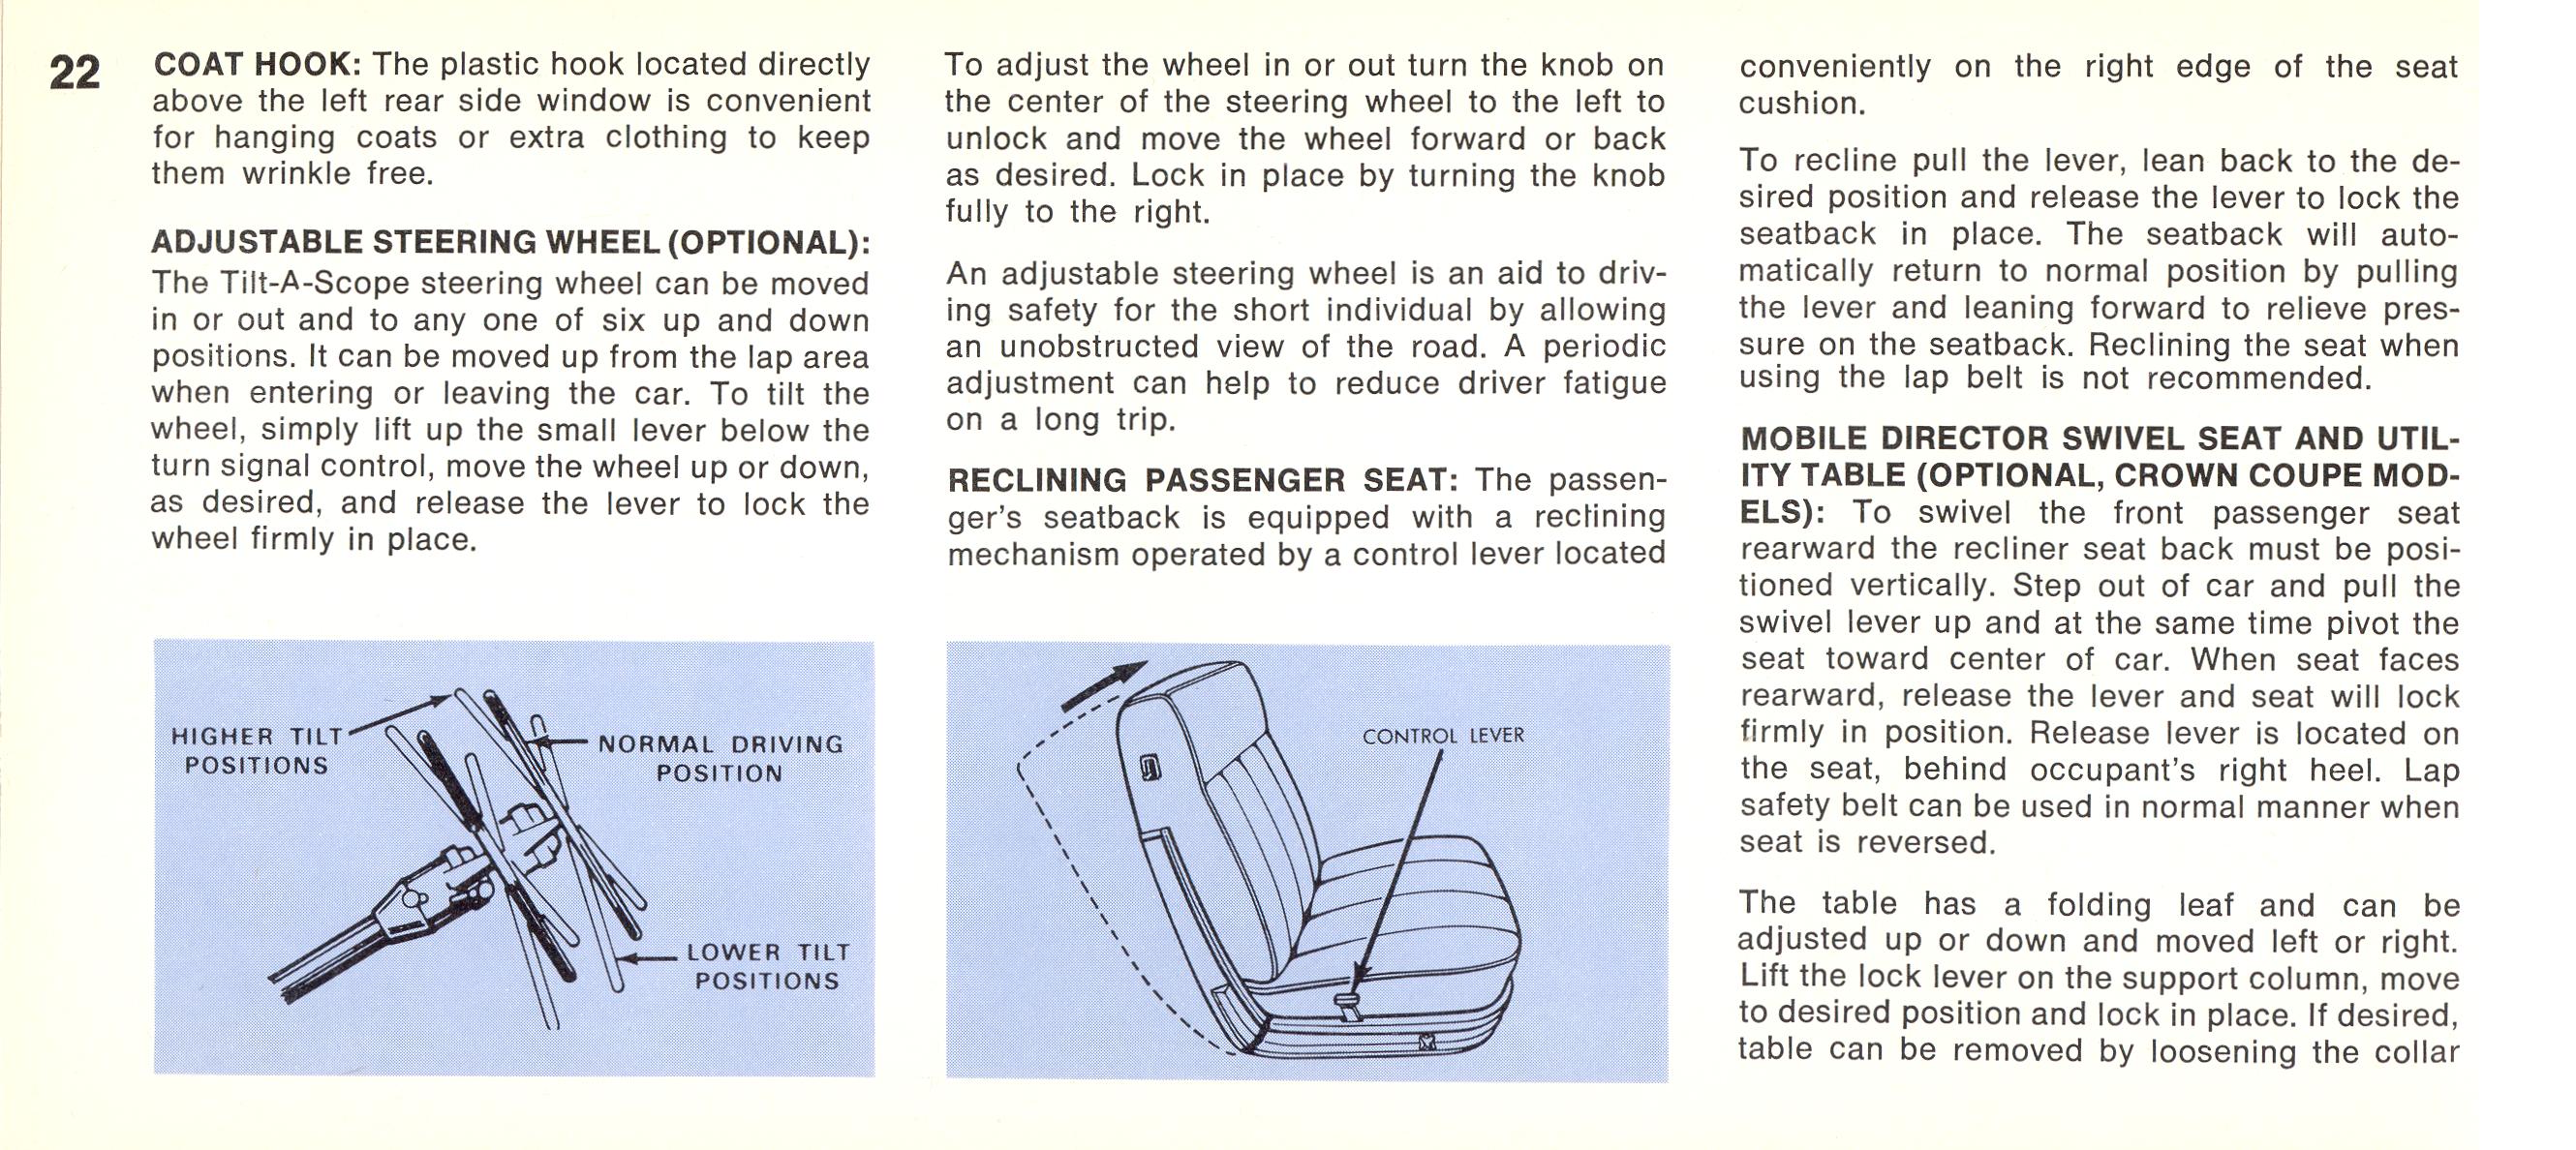 1968 Chrysler Imperial Owners Manual Page 22